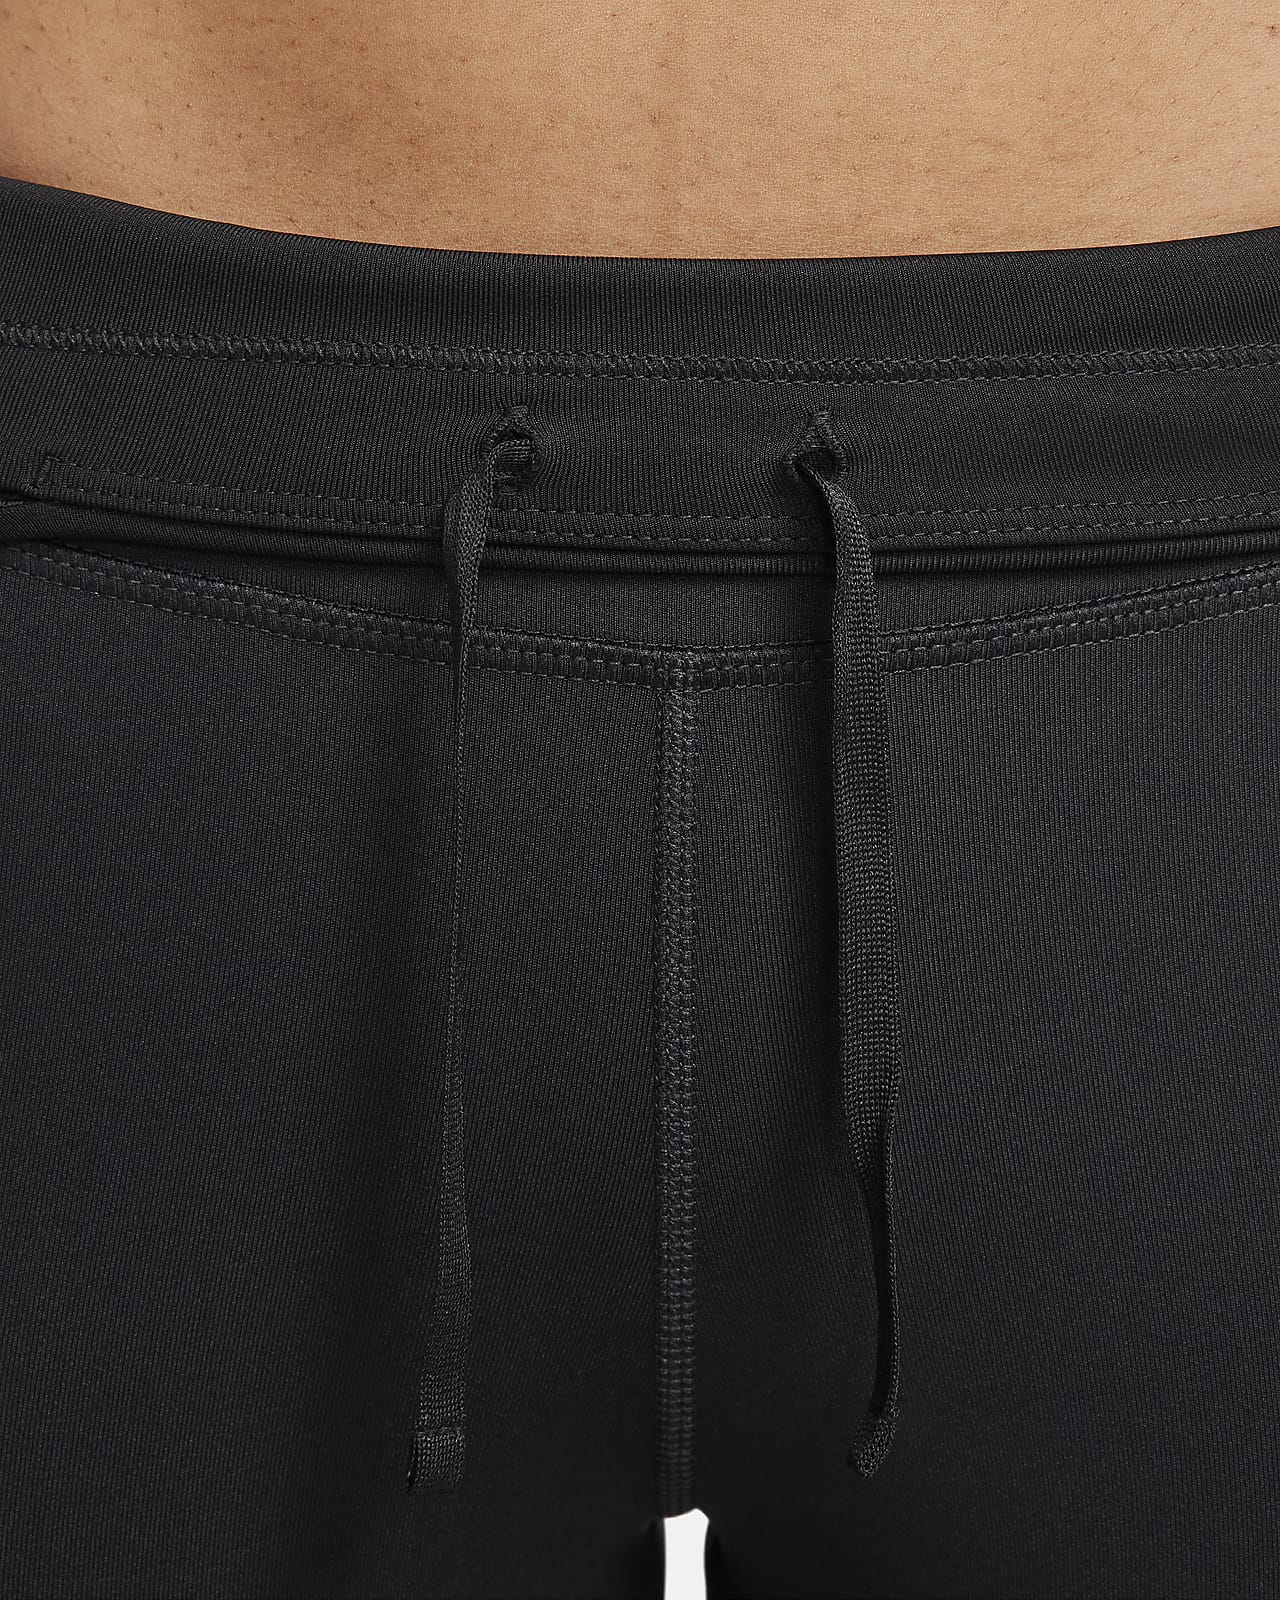 Nike Fast Mid-Rise 7/8 Running Leggings with Pockets